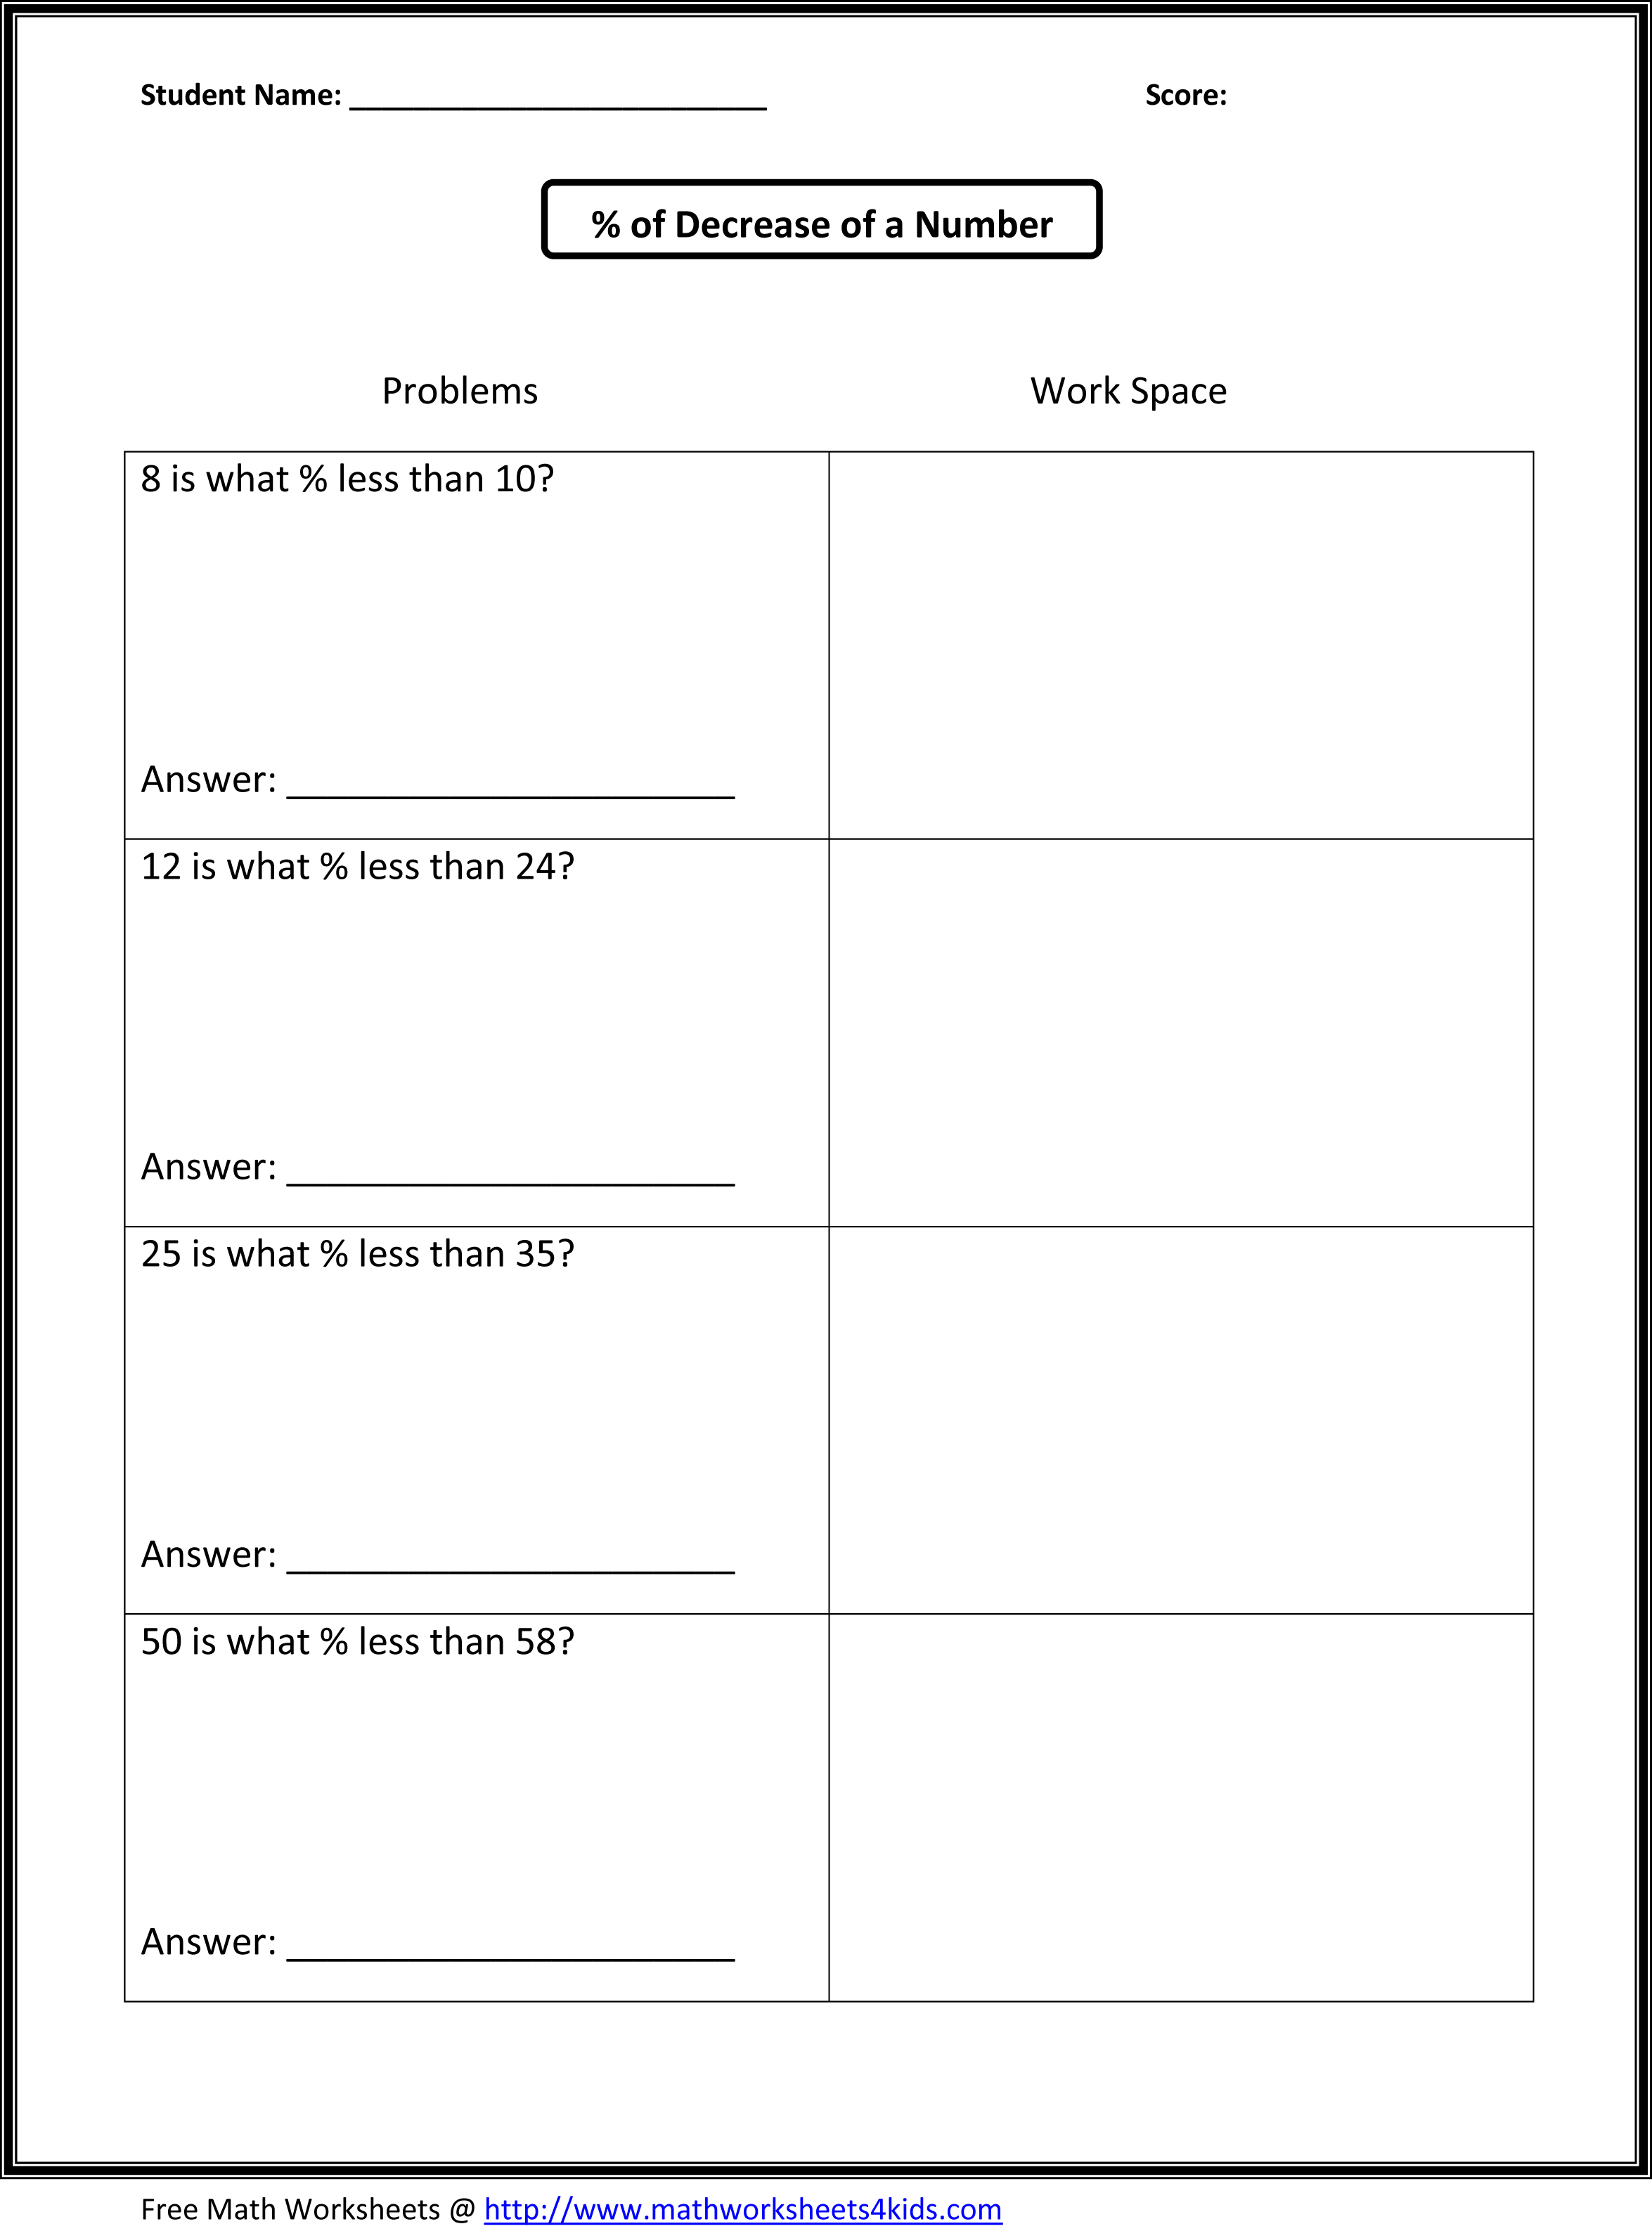 10-best-images-of-7th-grade-math-worksheets-with-answer-key-7th-grade-math-worksheets-algebra